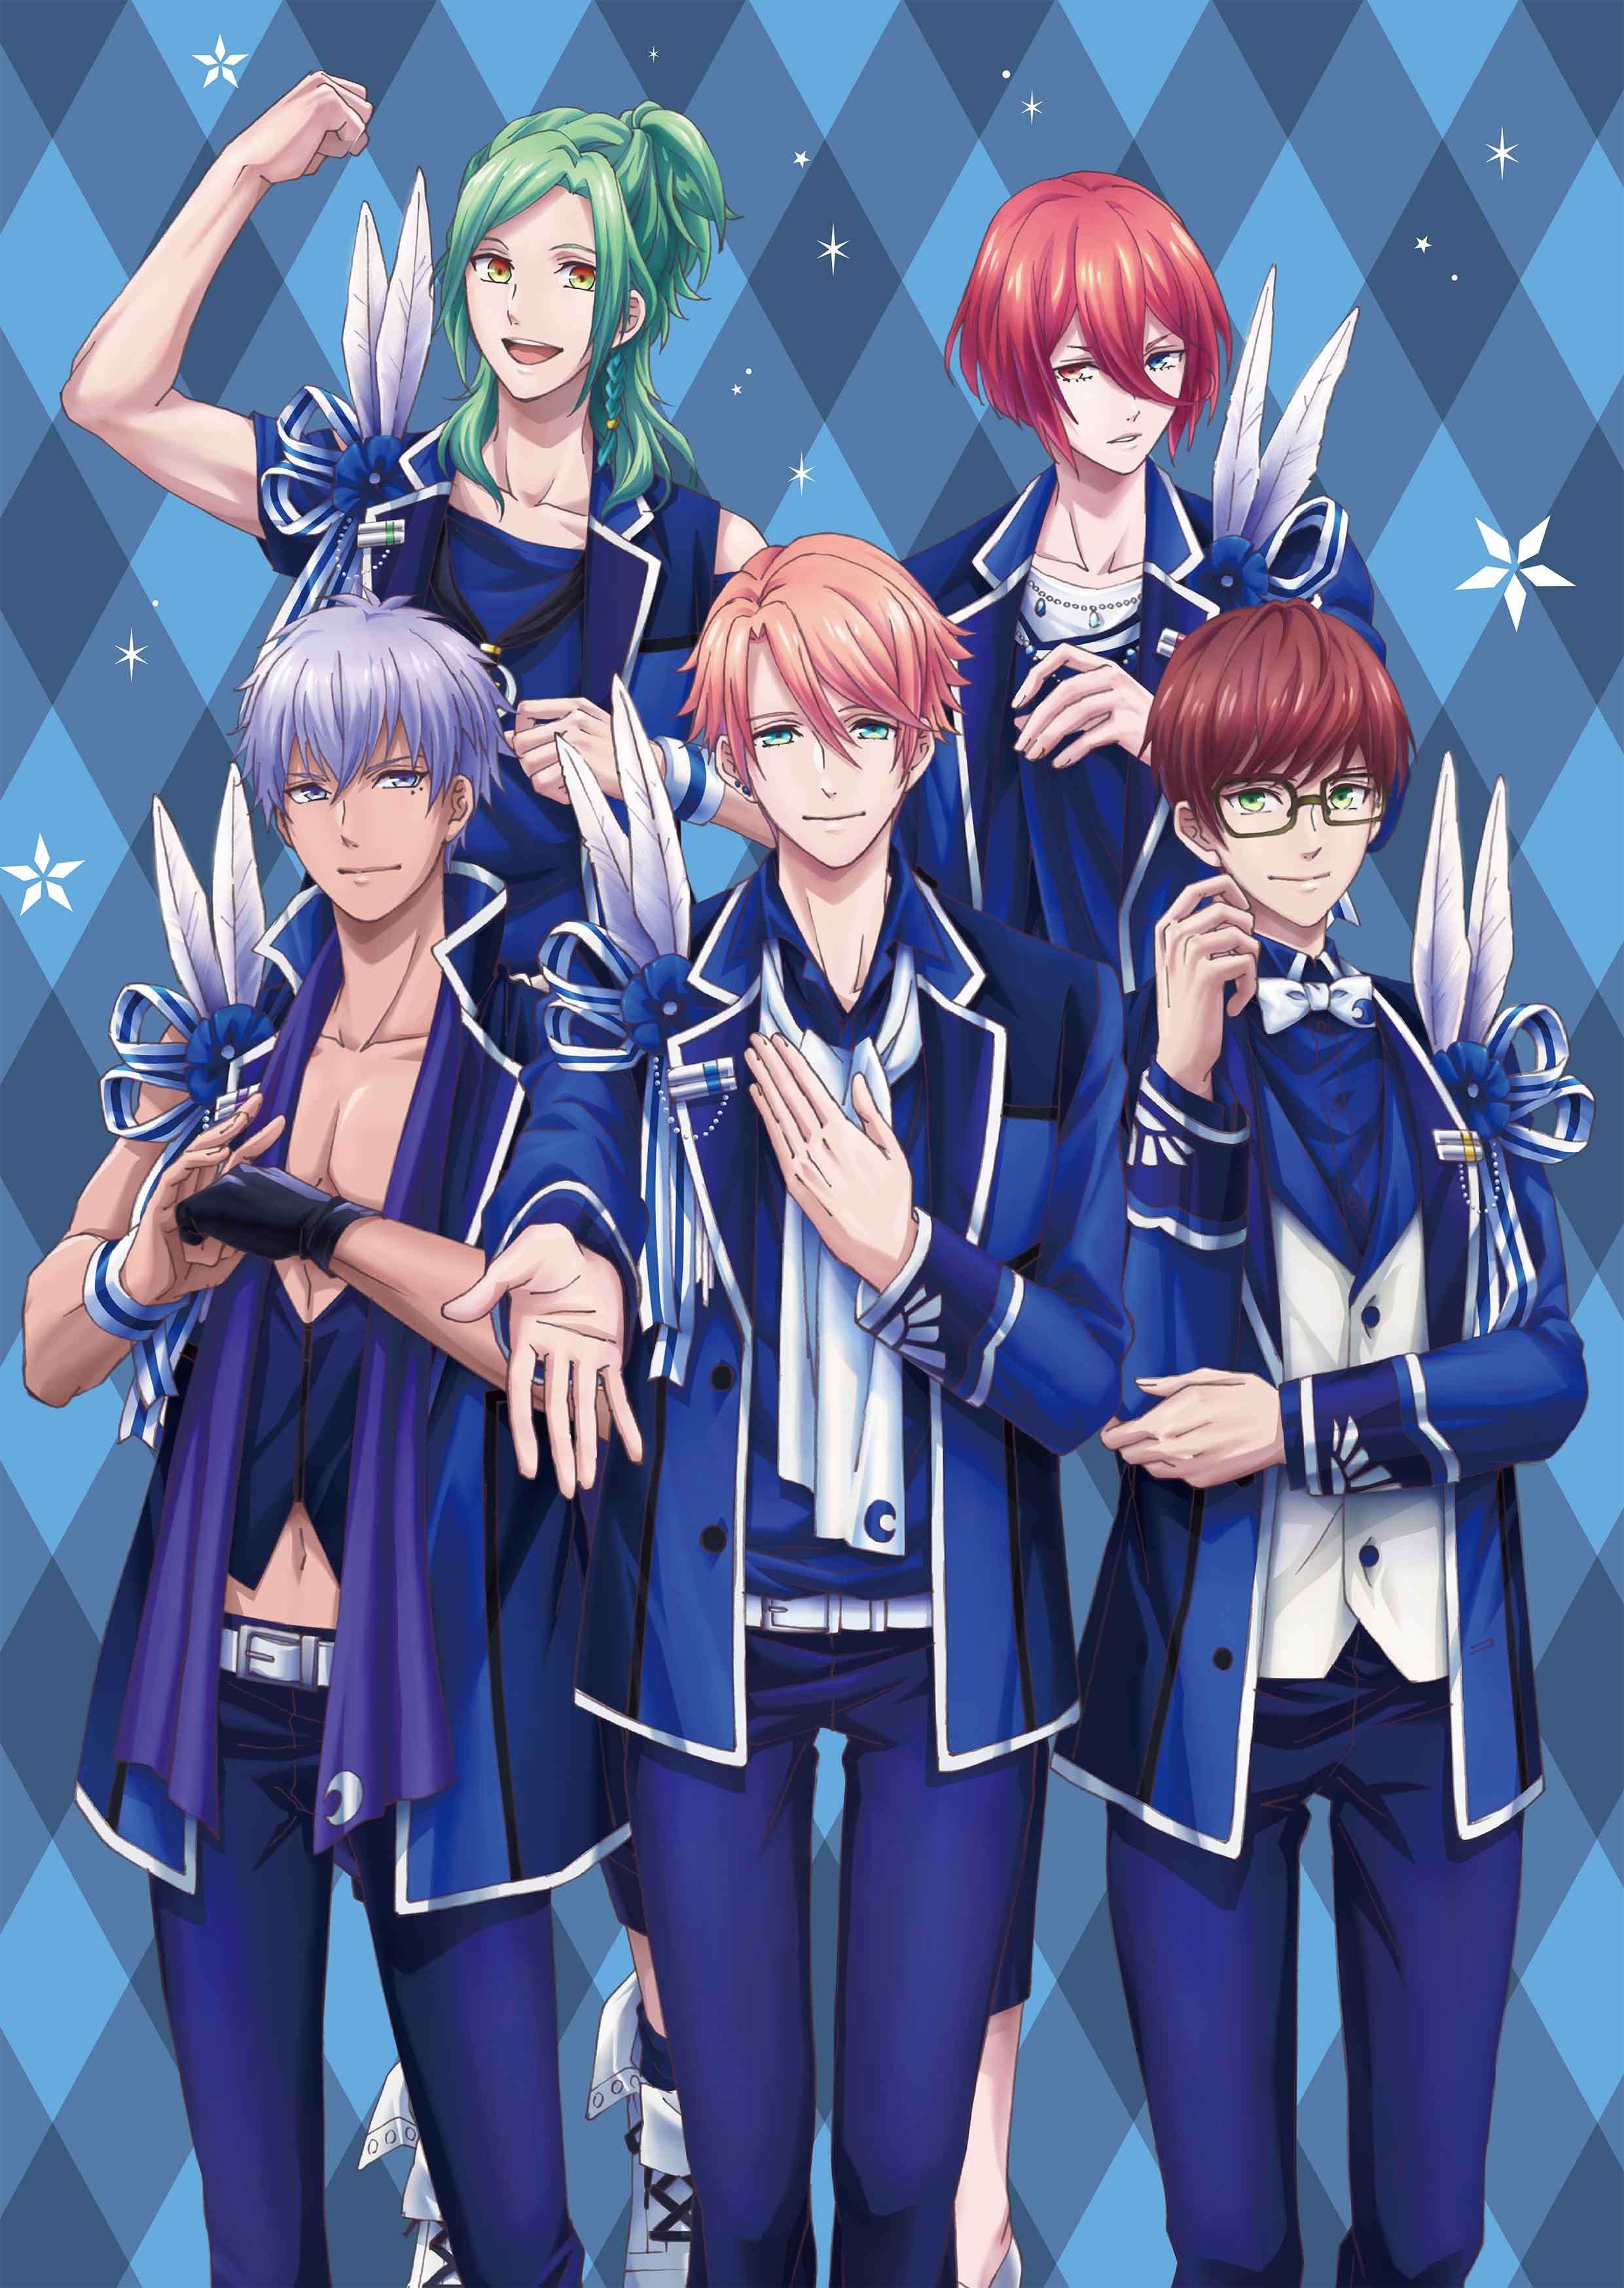 「MooNs」 (C)MAGES.／Team B-PRO　(C)MAGES.／Team B-PRO2　(C)B-PROJECT